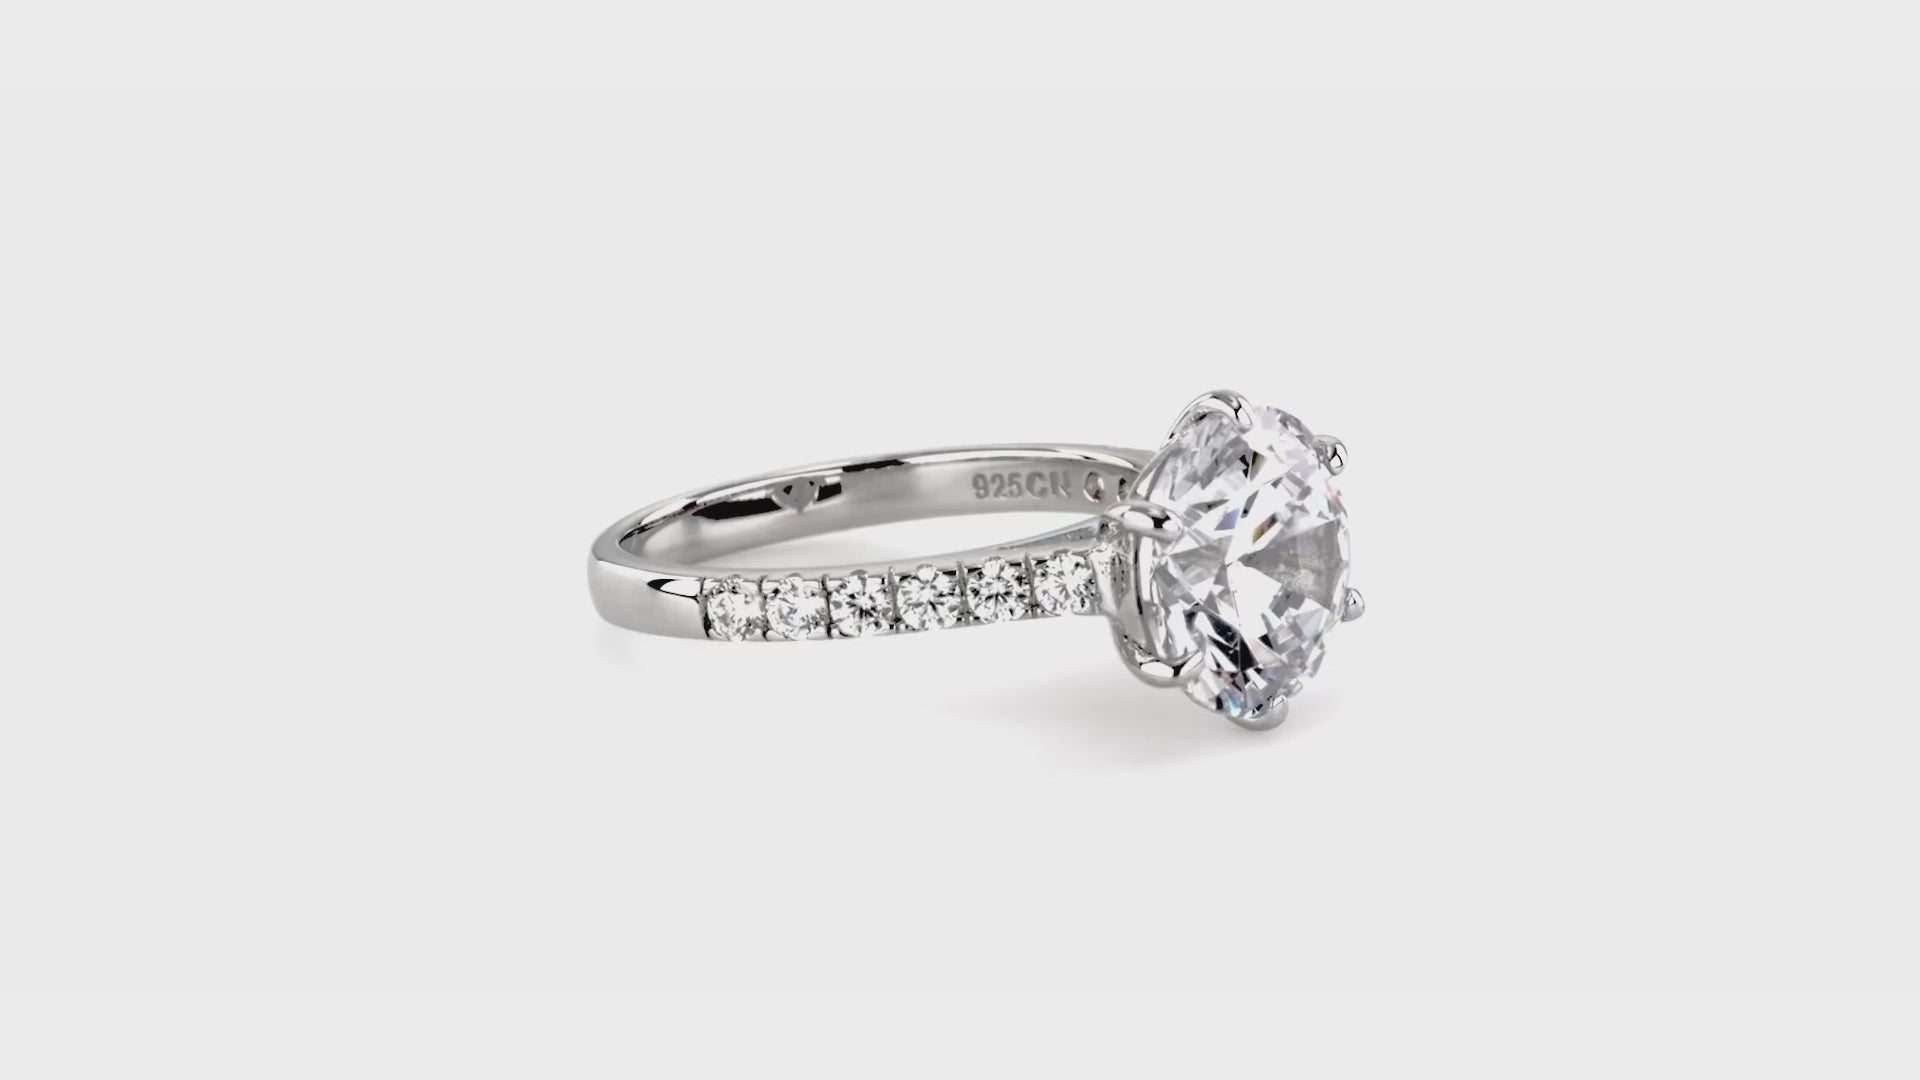 Video Contains Solitaire 3.8ct Round CZ Ring Set in Sterling Silver. Style Number VR357-02